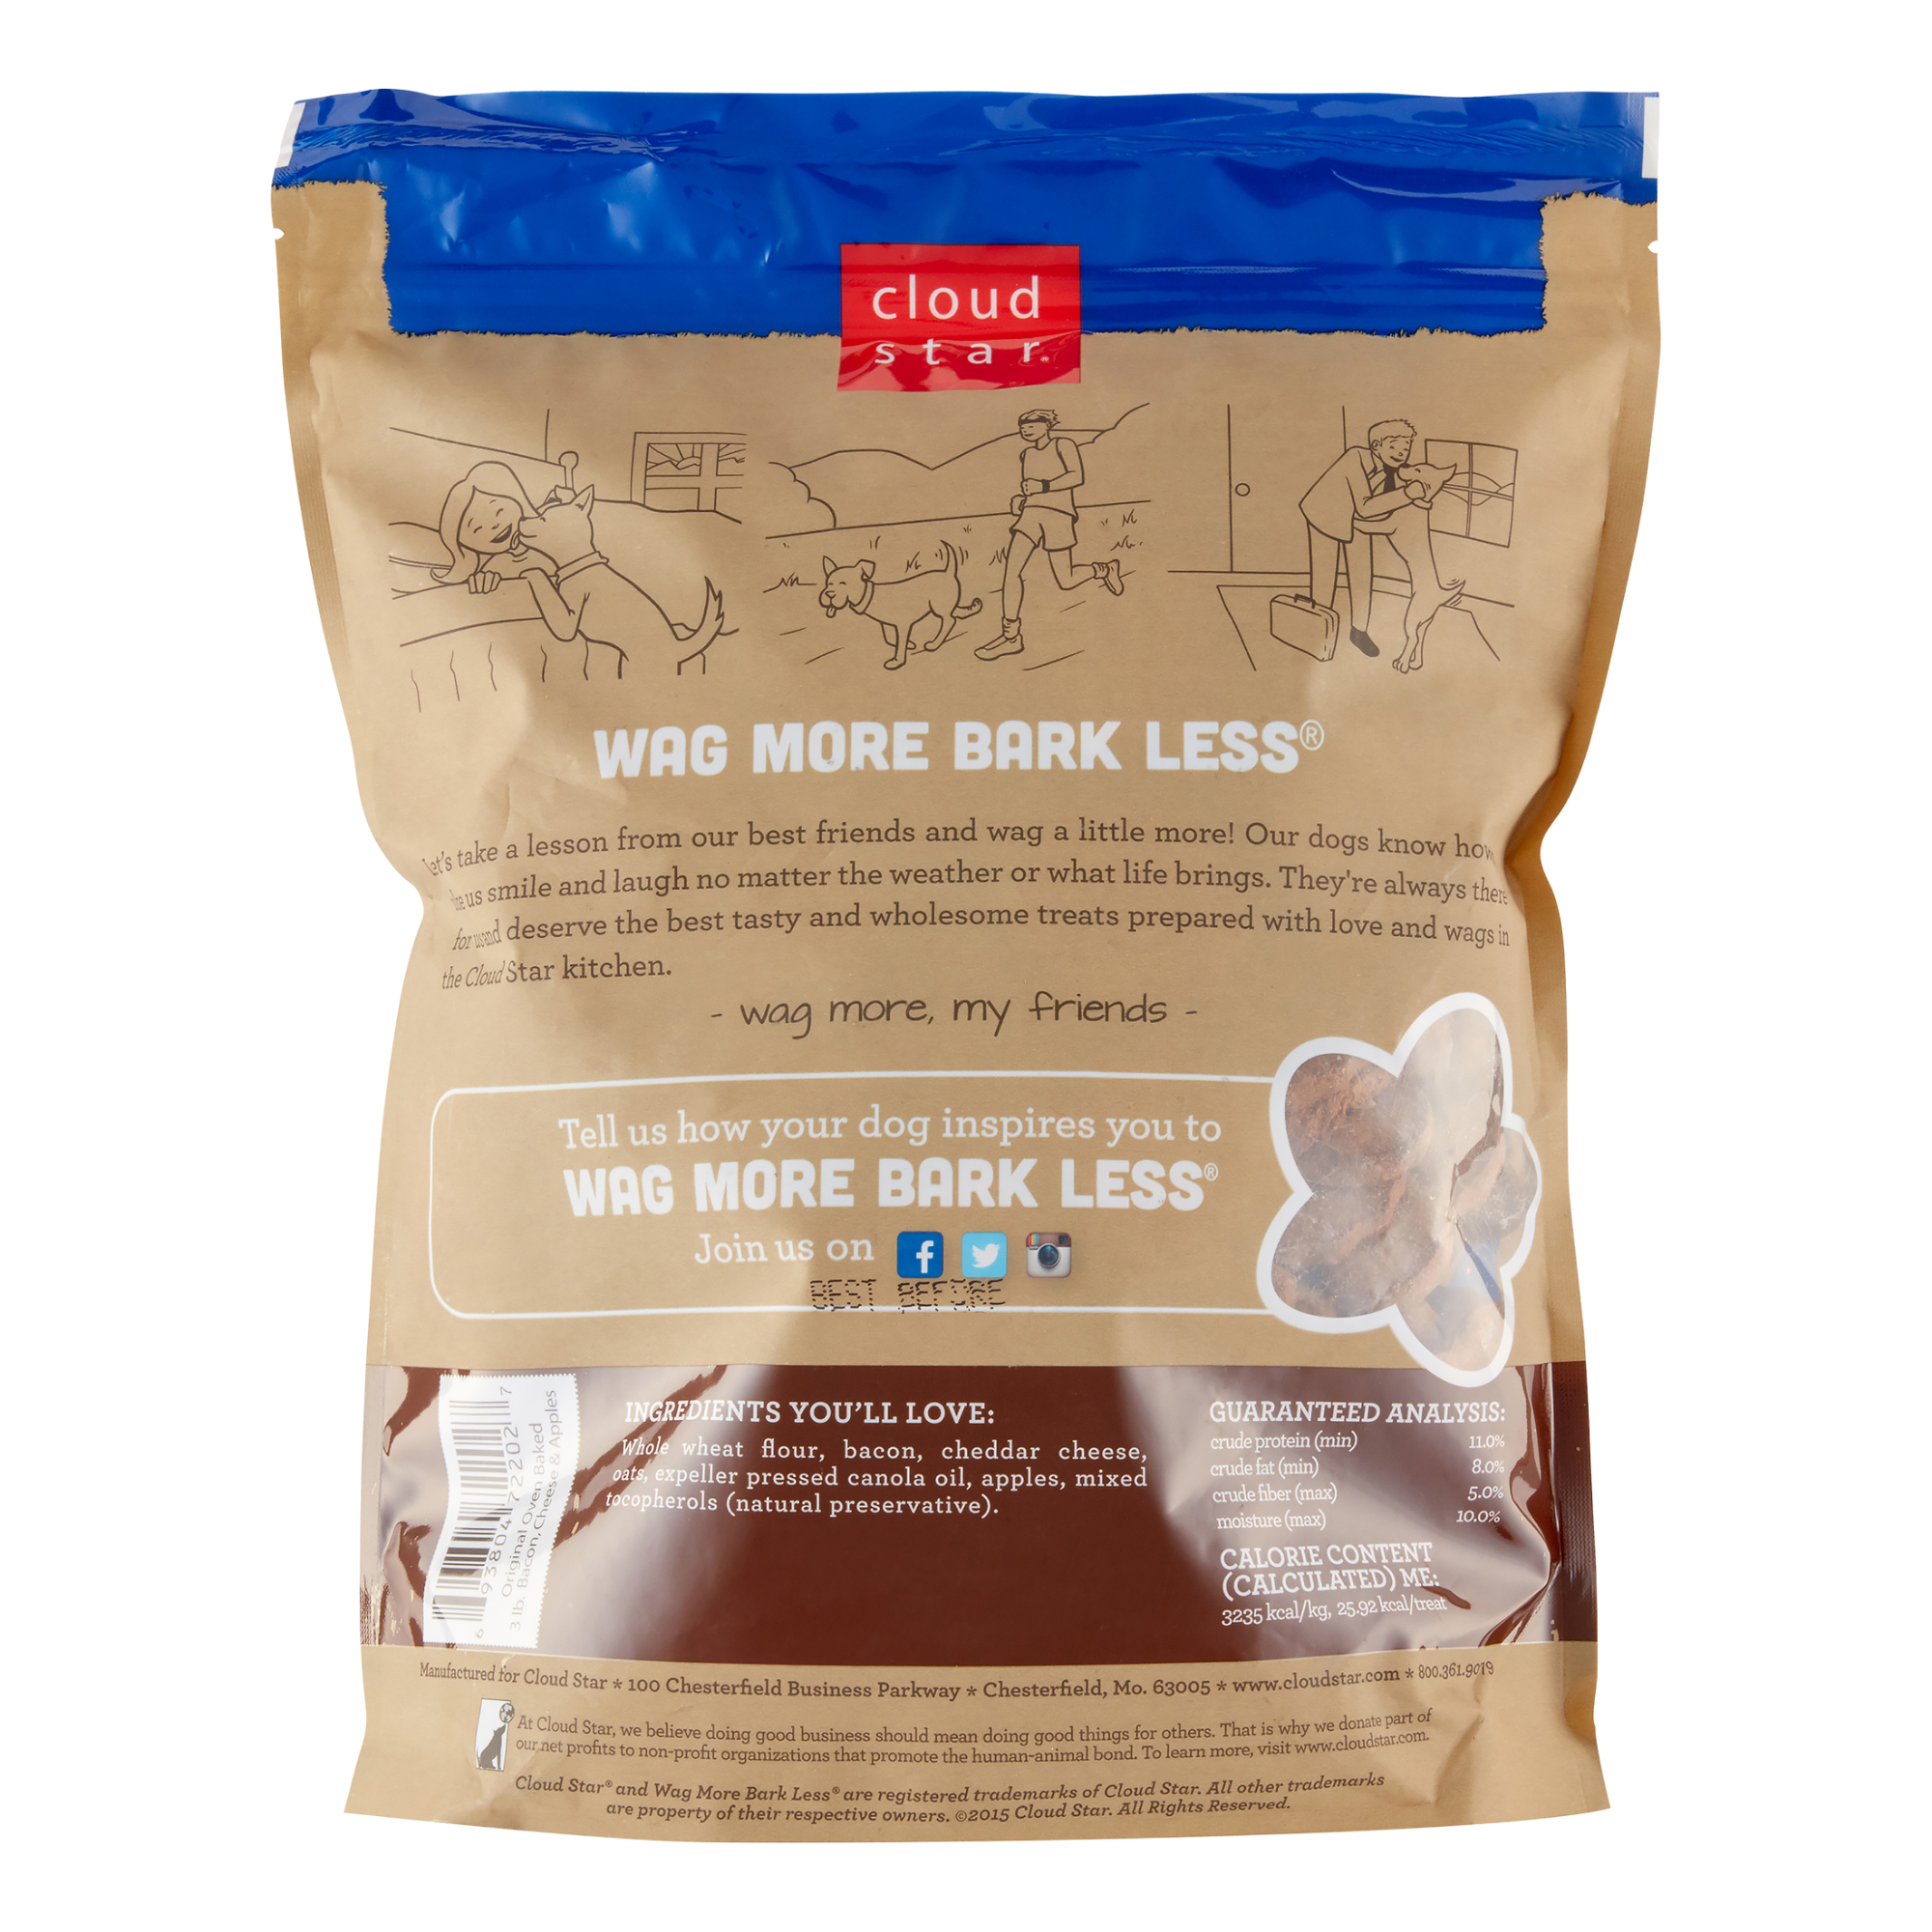 Cloud Star Wag More Bark Less Oven Baked with Bacon, Cheese & Apples Dog Treats 3 lbs - Mutts & Co.